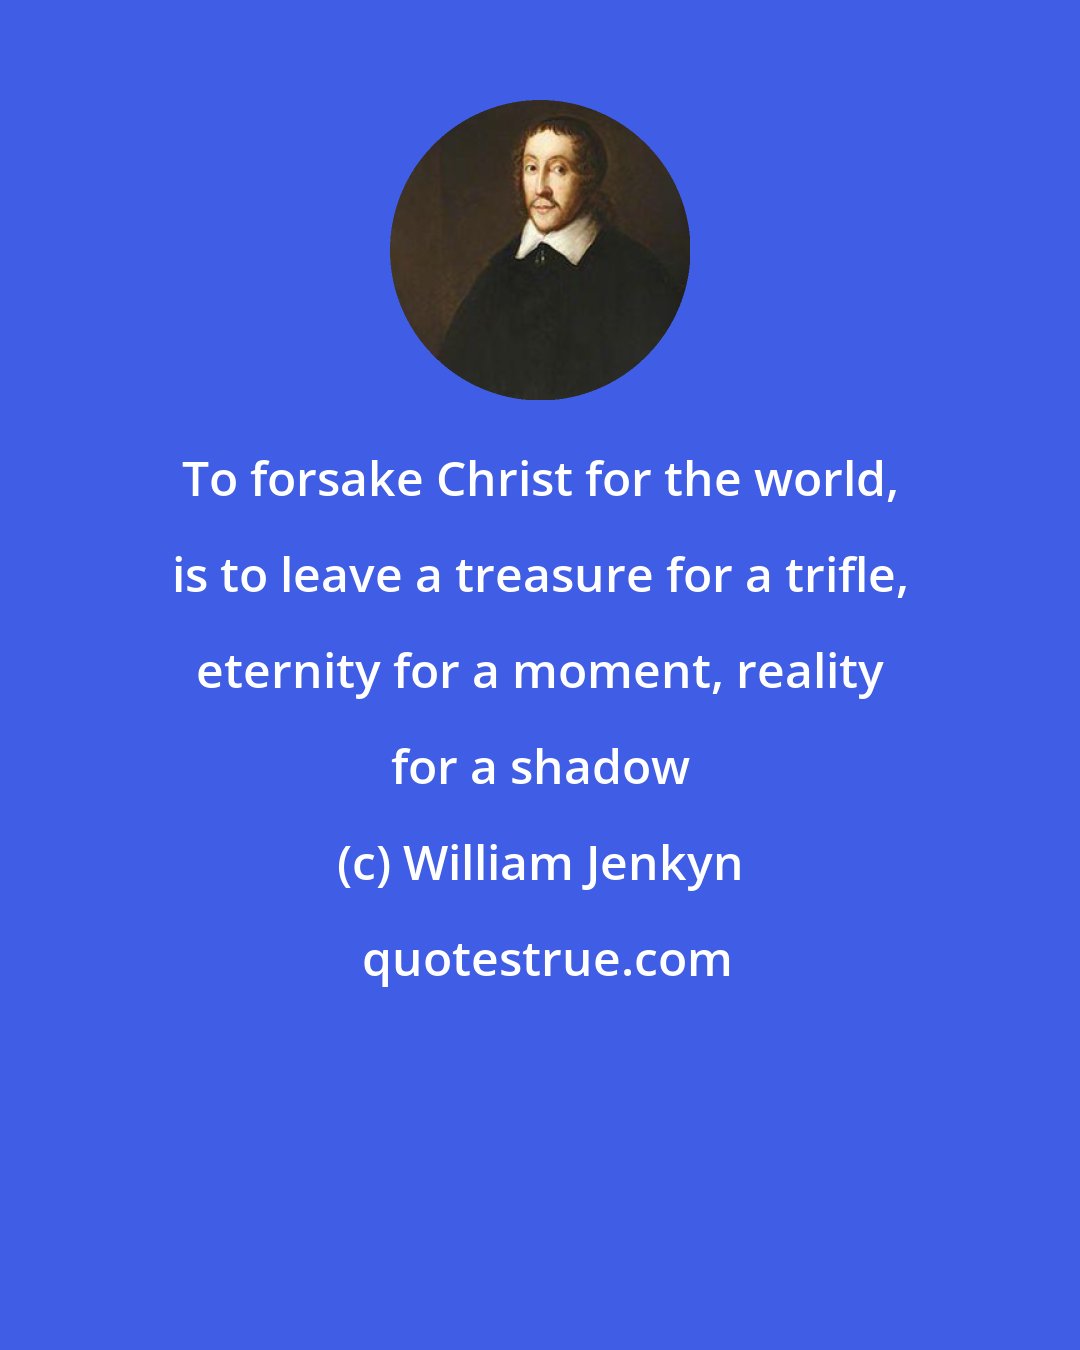 William Jenkyn: To forsake Christ for the world, is to leave a treasure for a trifle, eternity for a moment, reality for a shadow